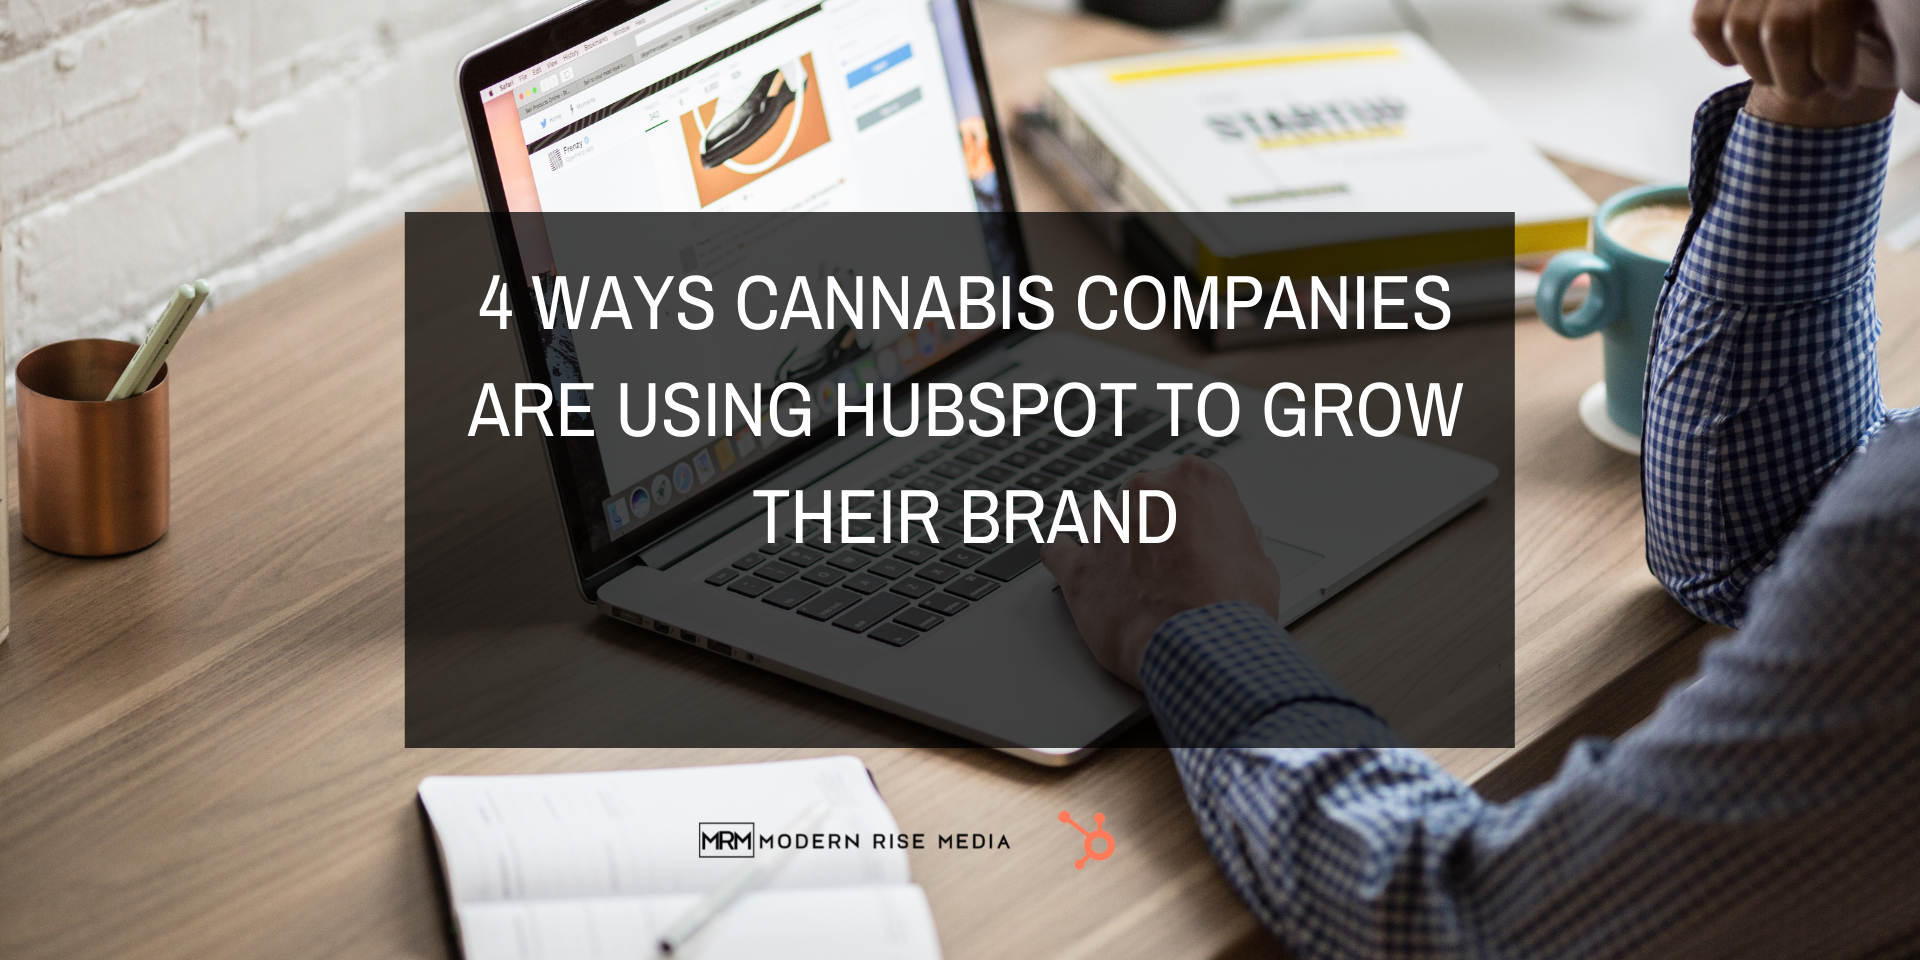 4 Ways Cannabis Companies Are Using HubSpot to Grow Their Brand